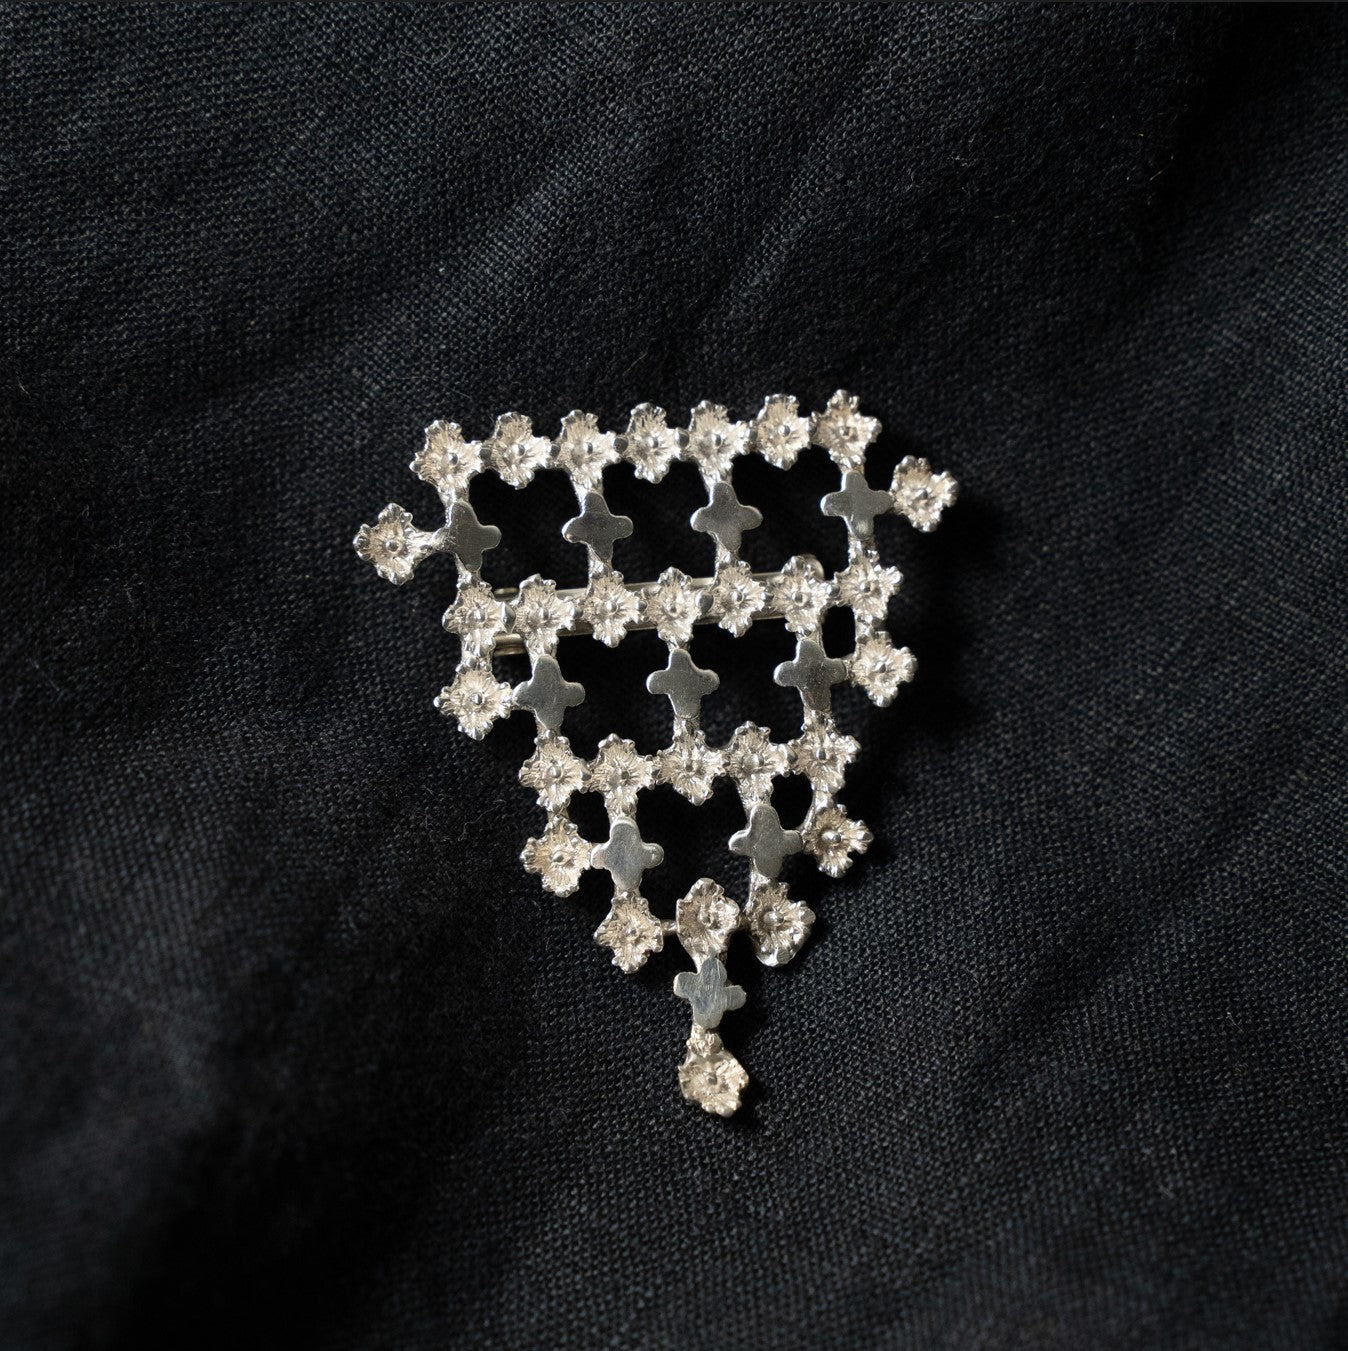 The Relic Brooch